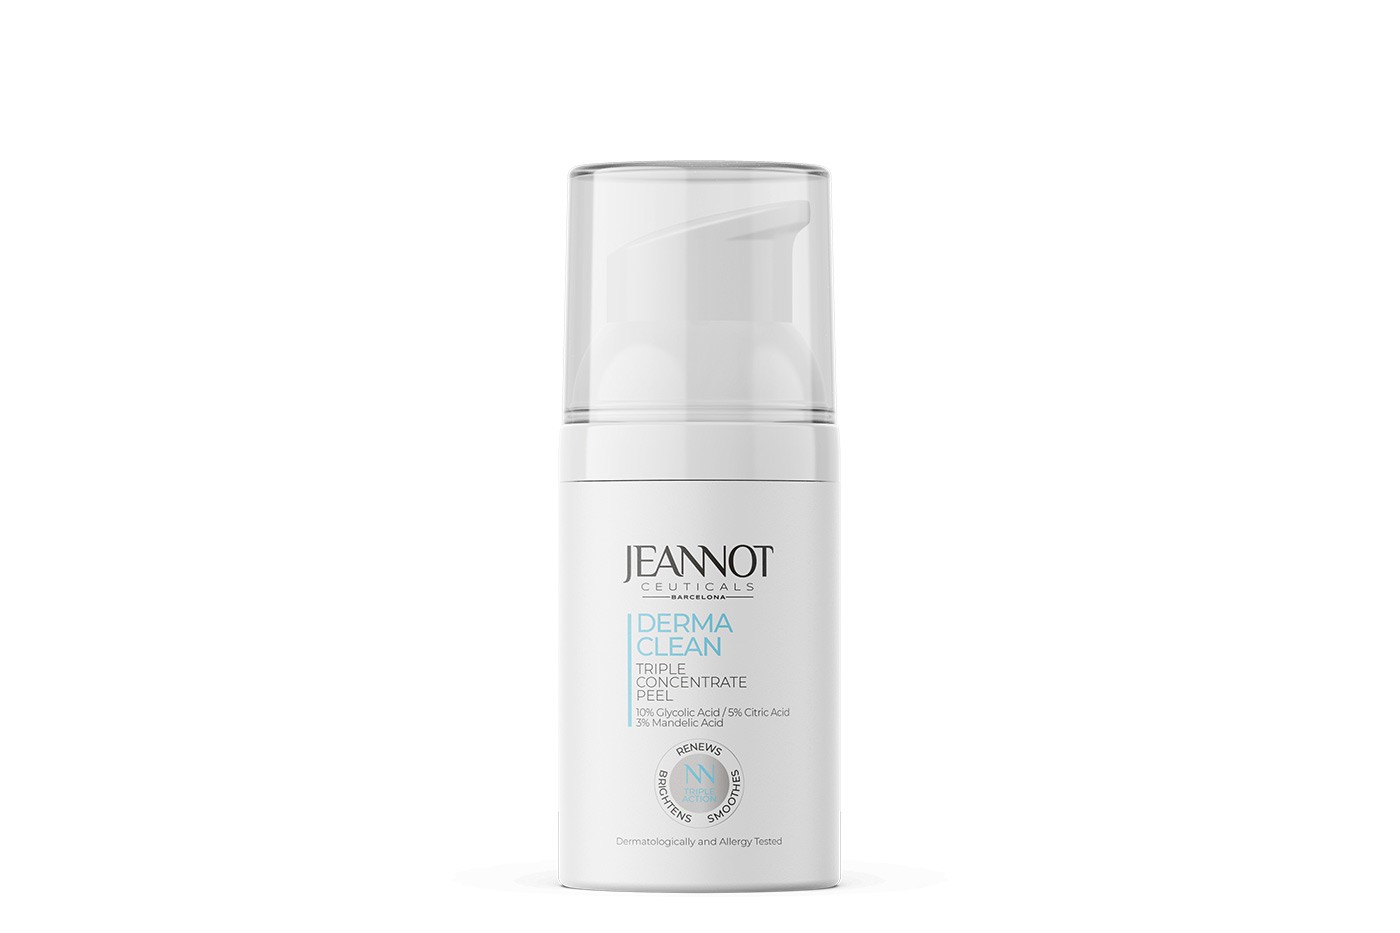 Jeannot Ceuticals Triple Concentrate Peel for a brighter skin 